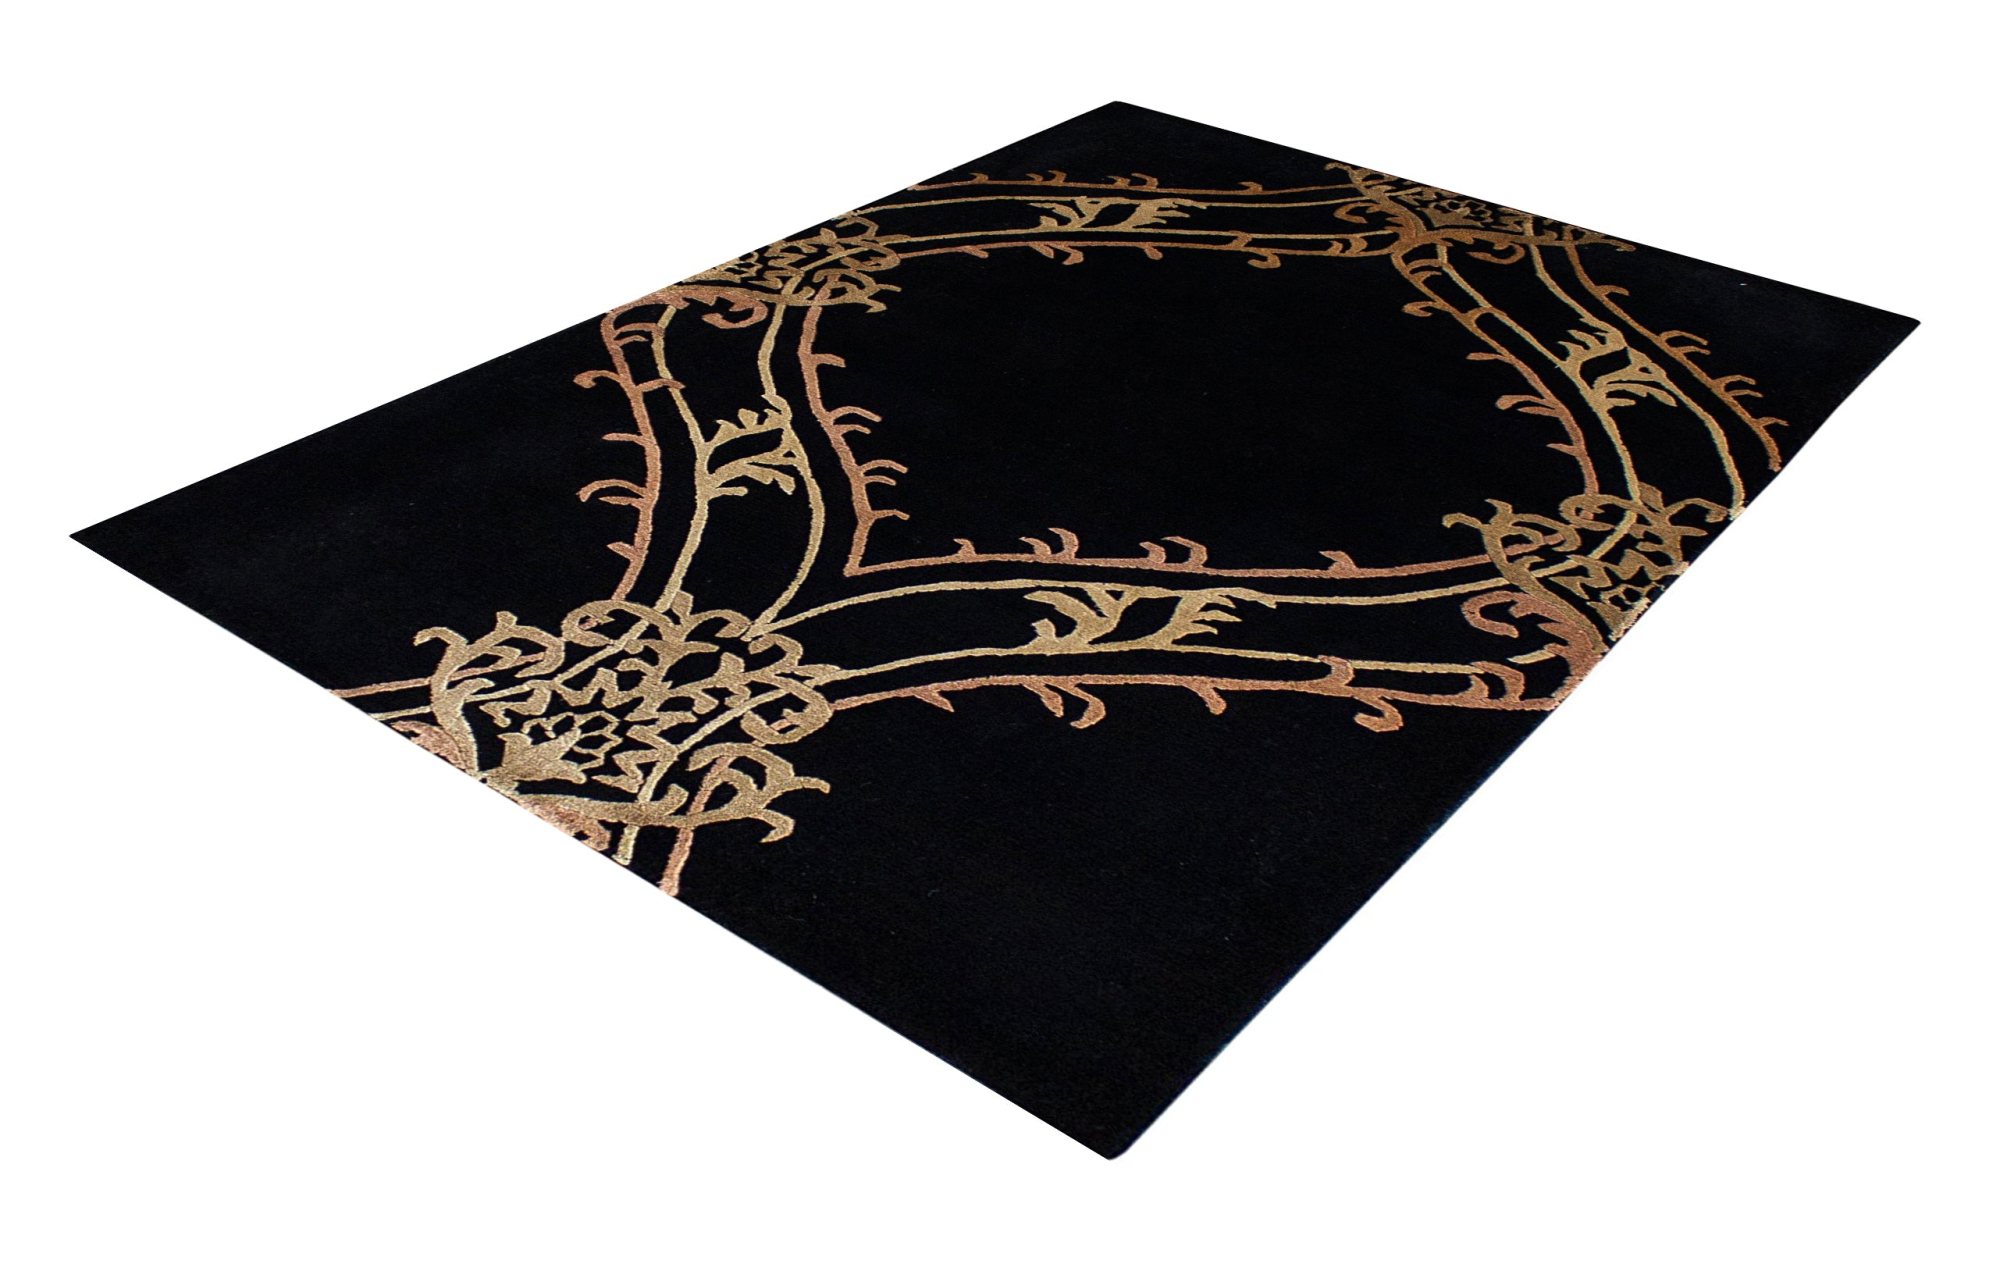 Area rug for living space and any room. Floor decor, rugs and carpets from Tabrizi Rugs. Indo Nepal Demask - Multiple Sizes. Canada's most trusted website to buy rugs online.